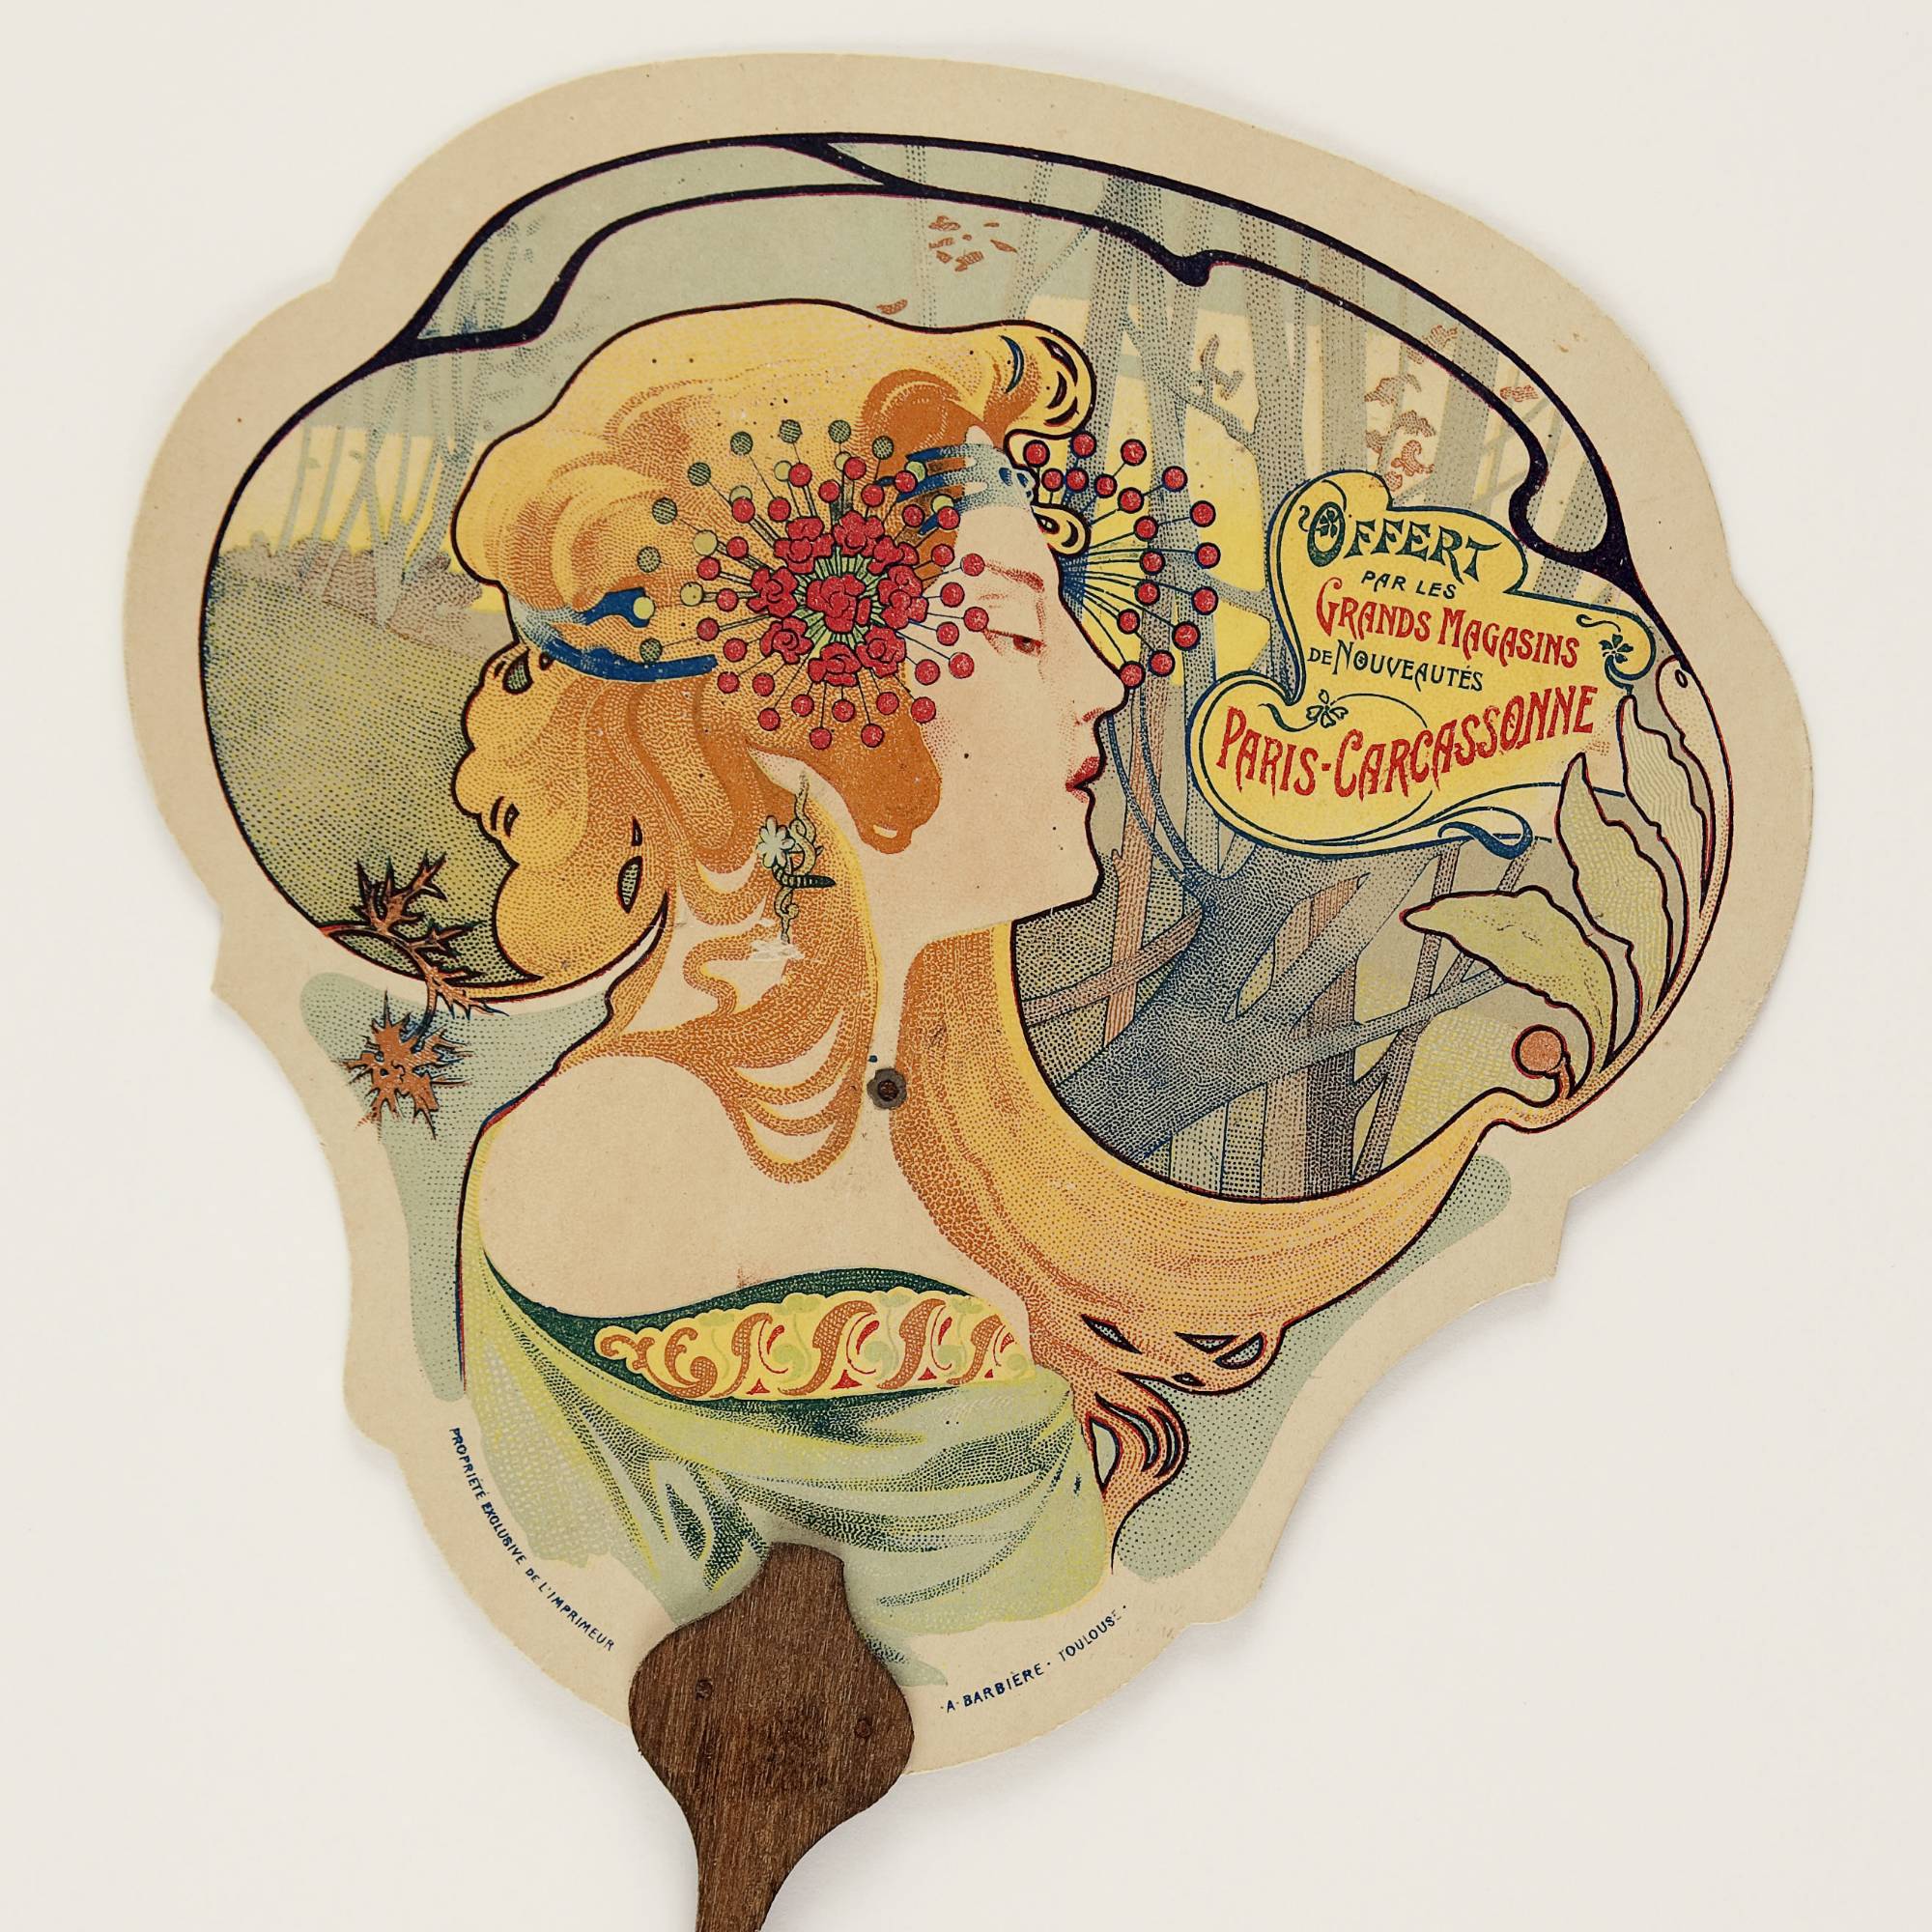 fan with lithographic print of woman with flowers in her long, orange hair next to text that reads "Grands Magasins de Nouveautes"